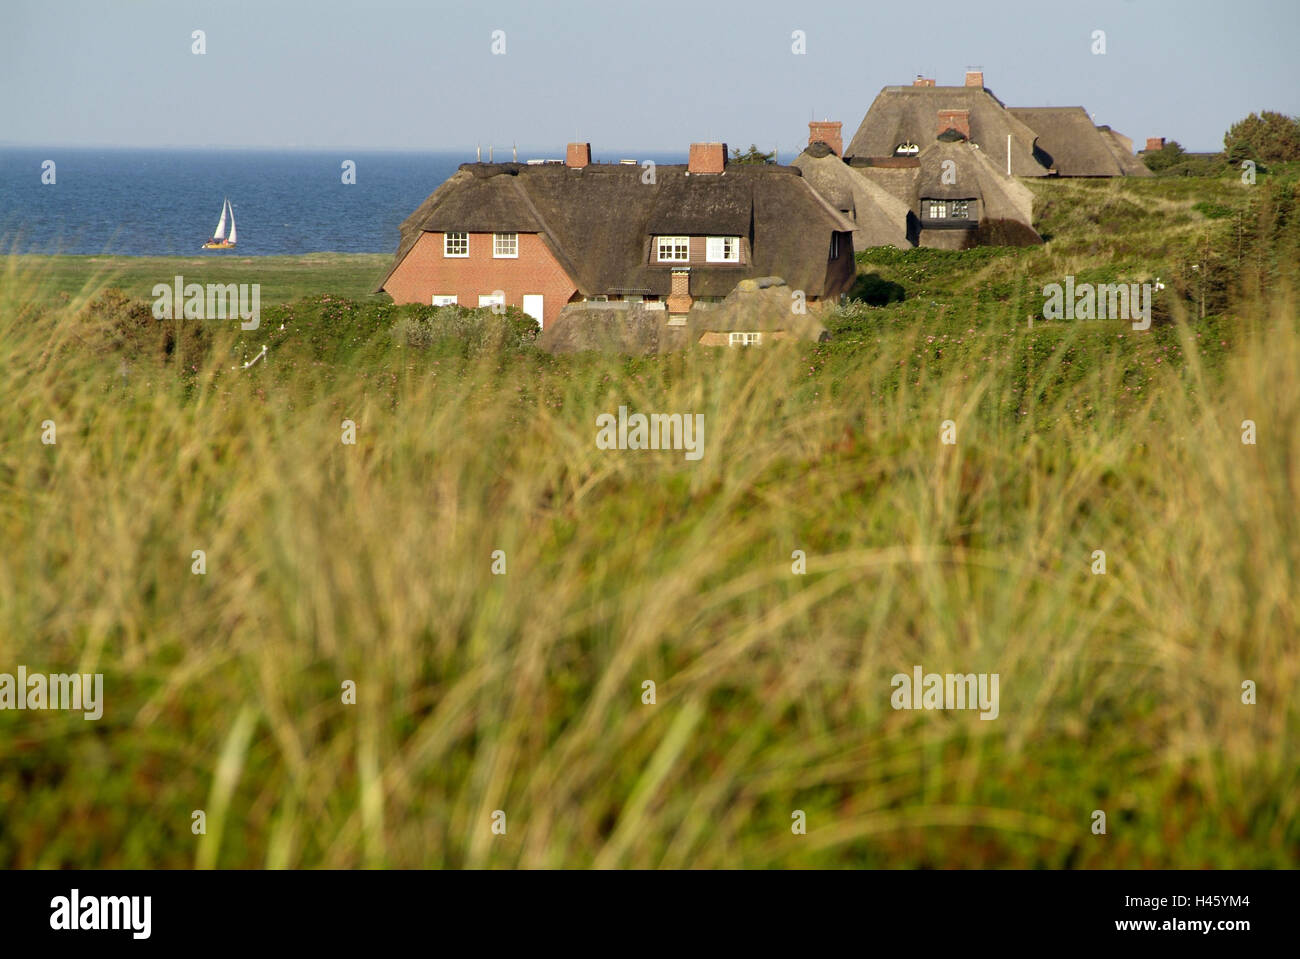 Germany, Schleswig - Holstein, island Sylt, Kampen, thatched-roof houses, sea, Stock Photo